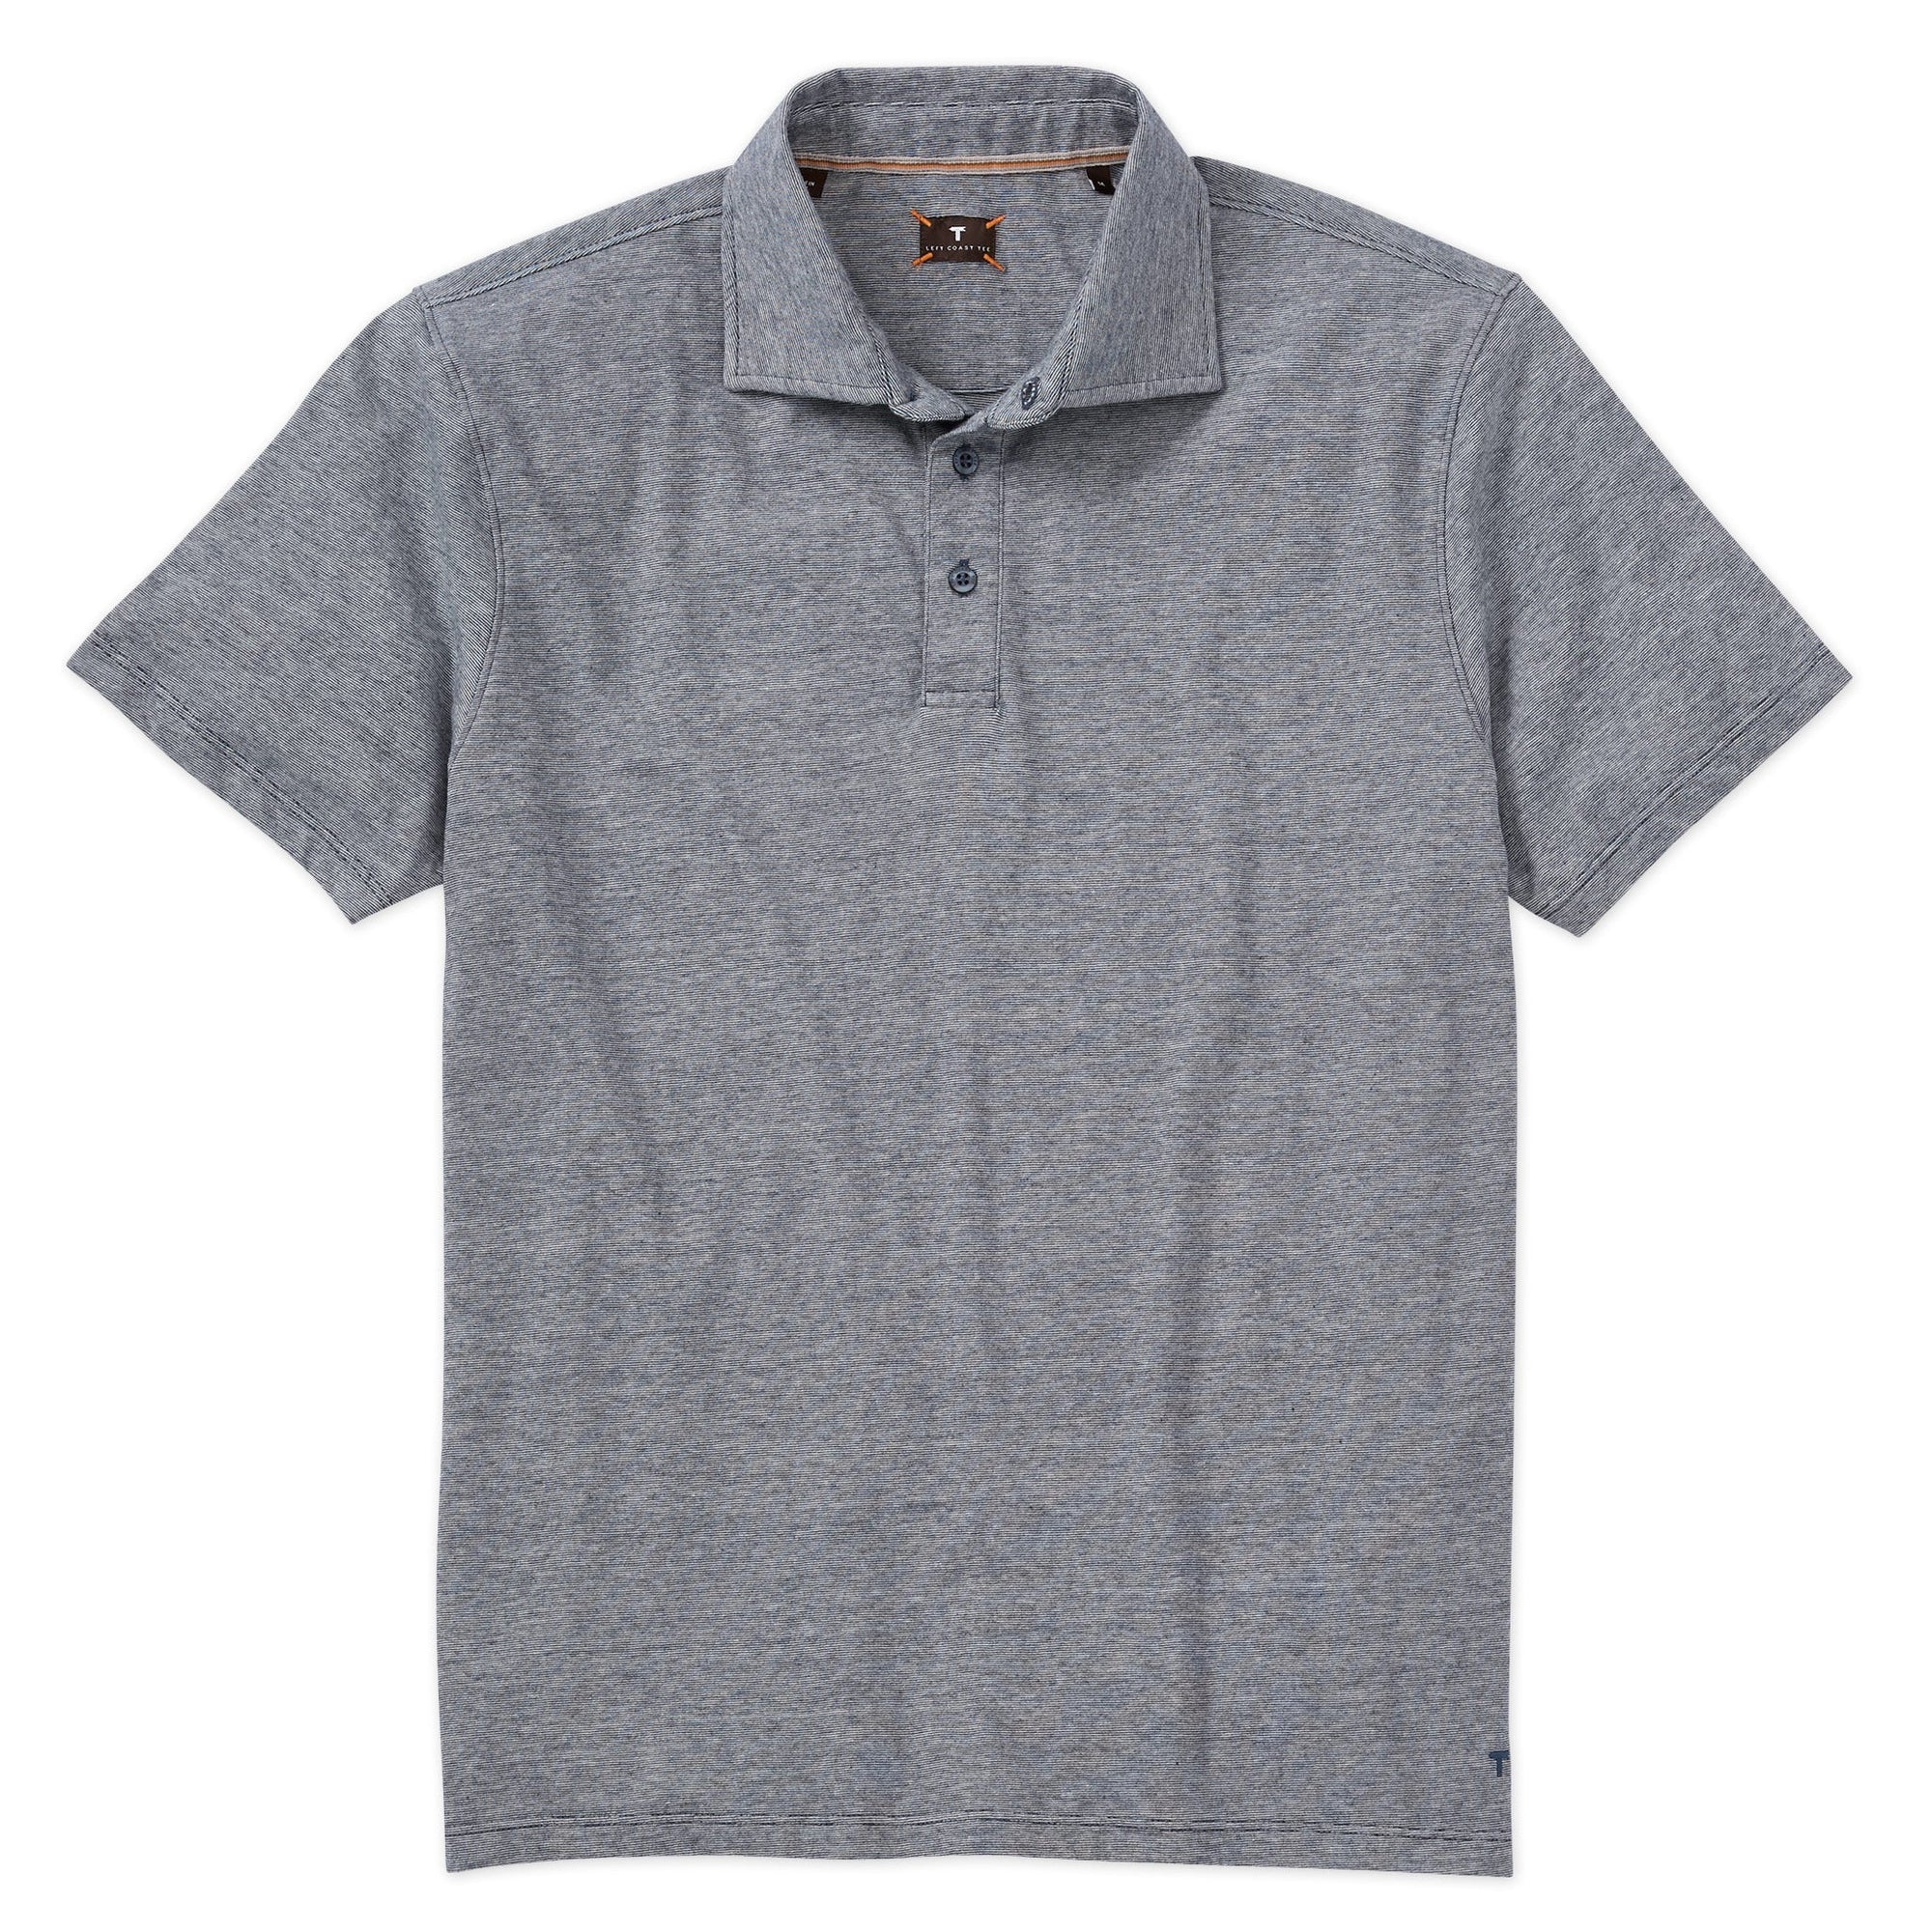 Superfine Hairline Polo in Navy by Left Coast Tee